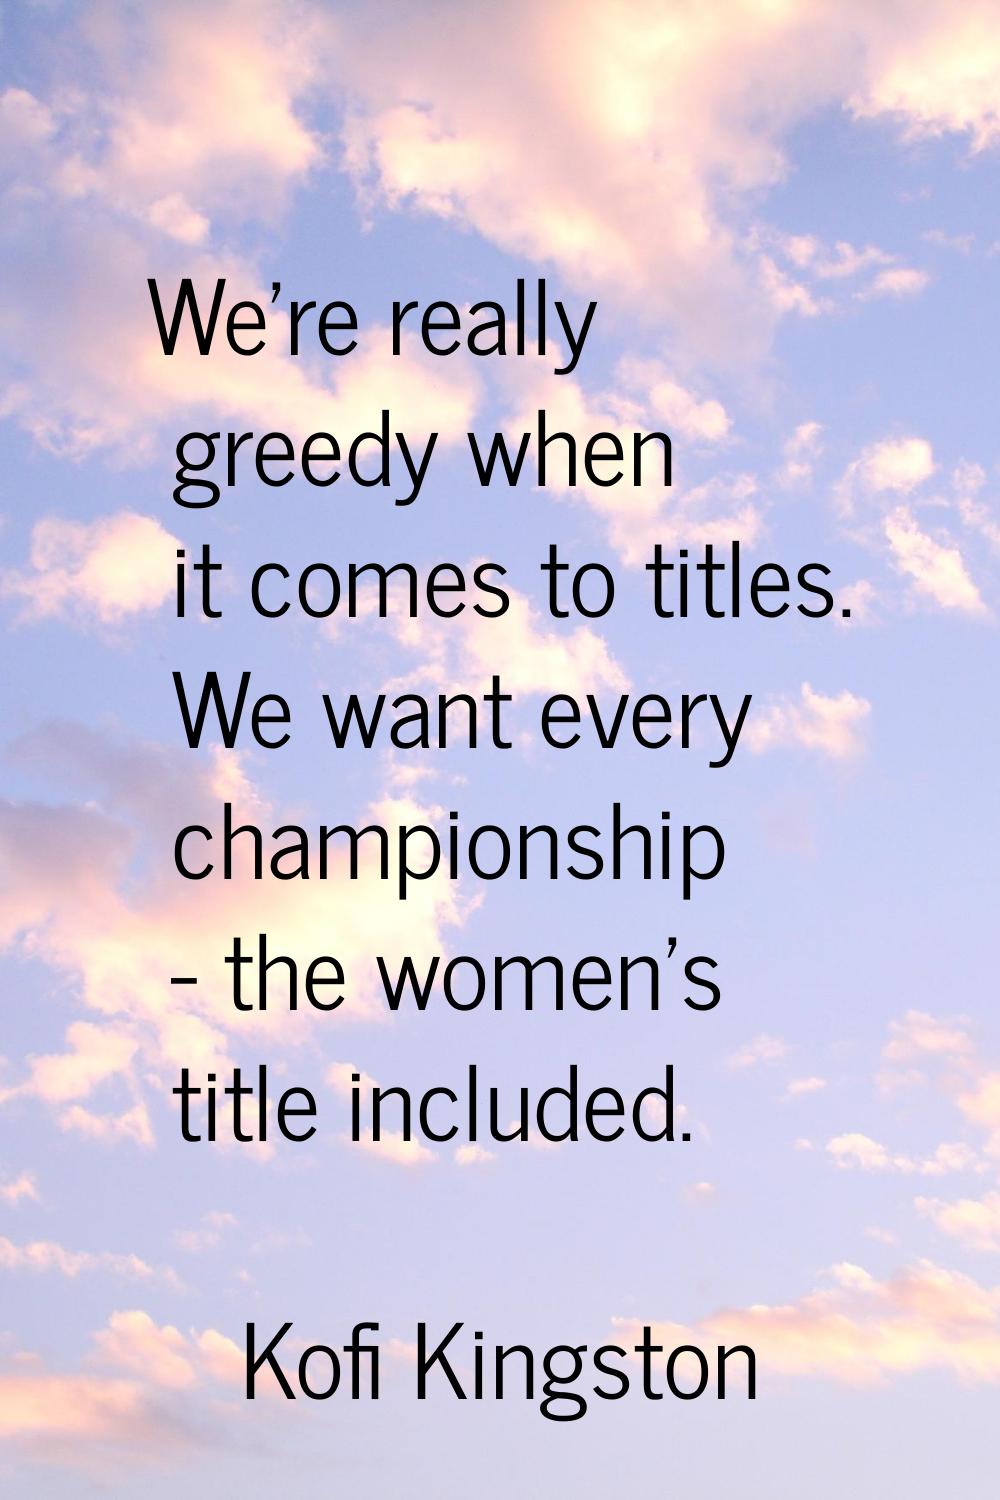 We're really greedy when it comes to titles. We want every championship - the women's title include